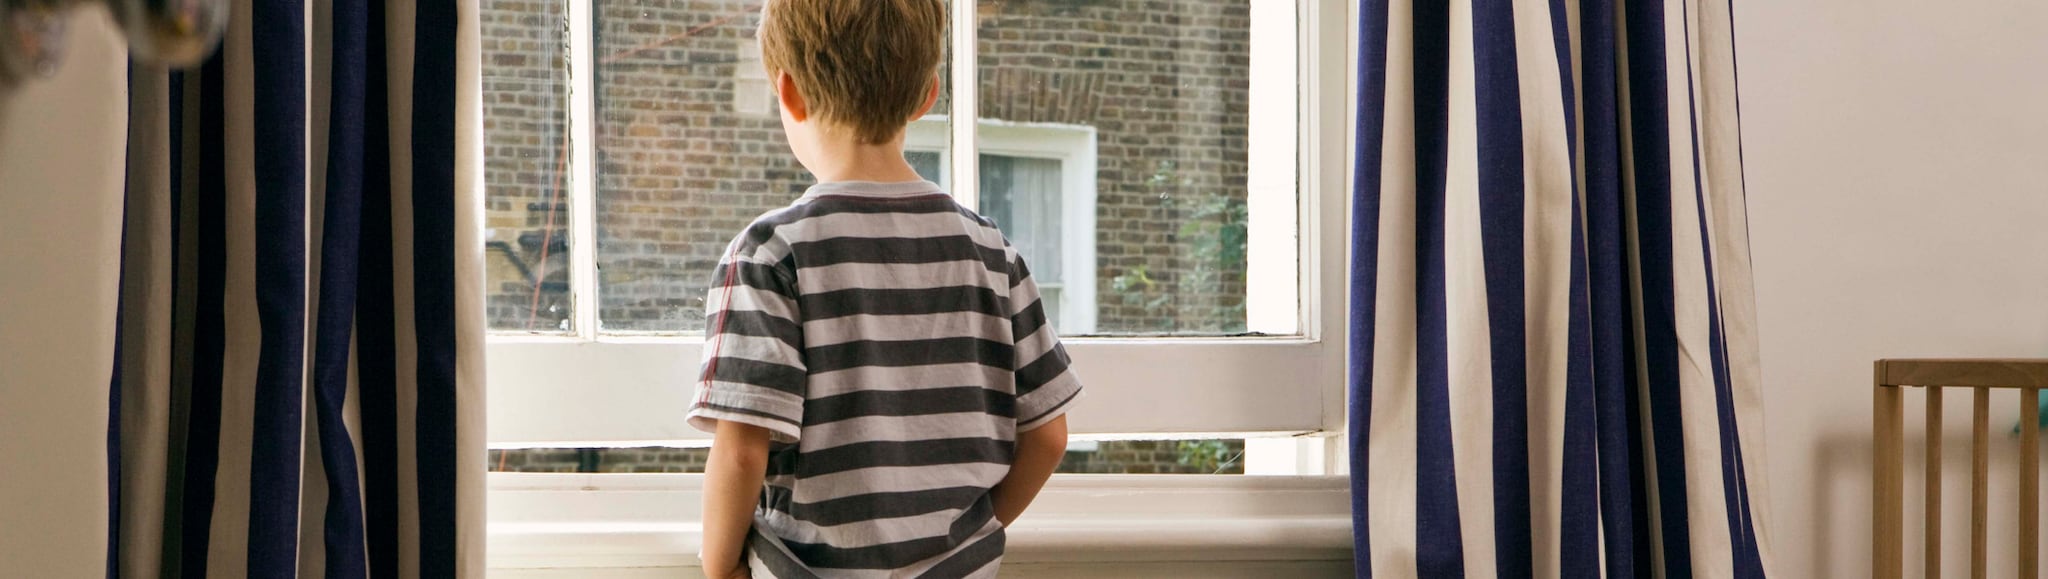 Young child looking out of window